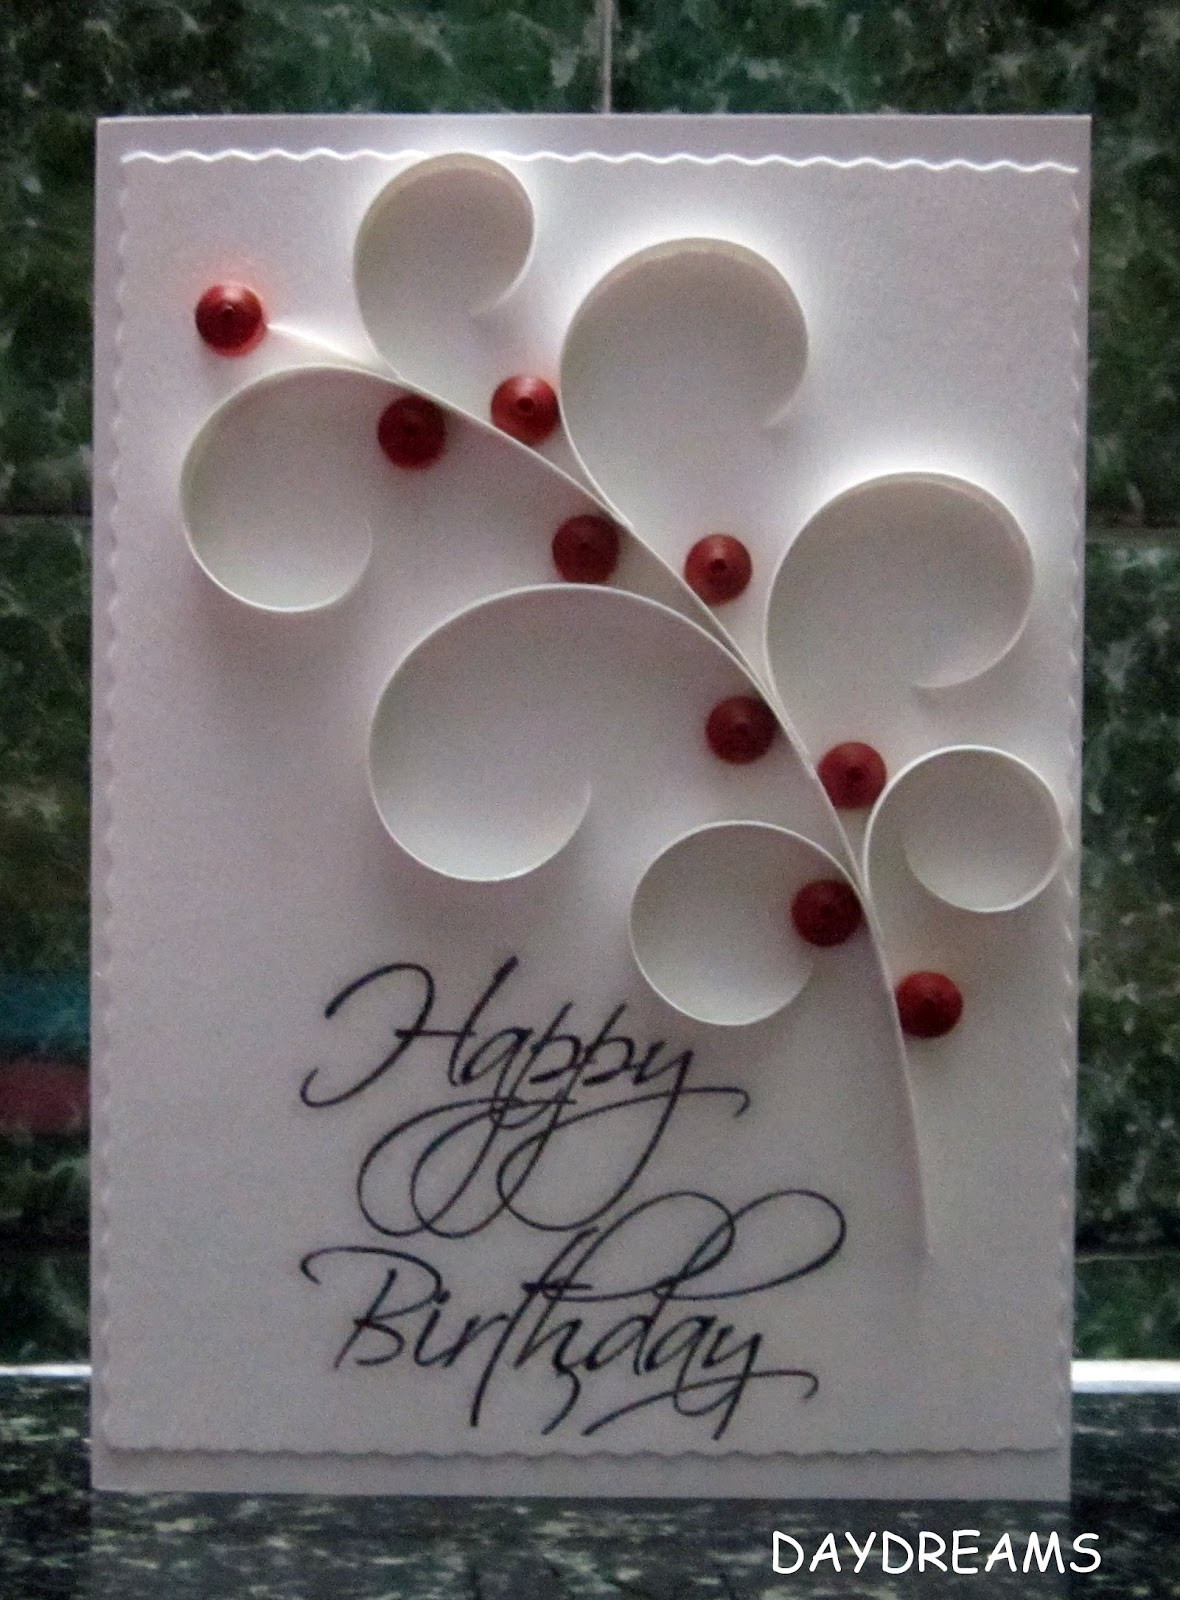 Best ideas about Simple Birthday Card
. Save or Pin DAYDREAMS Quilled birthday card Now.